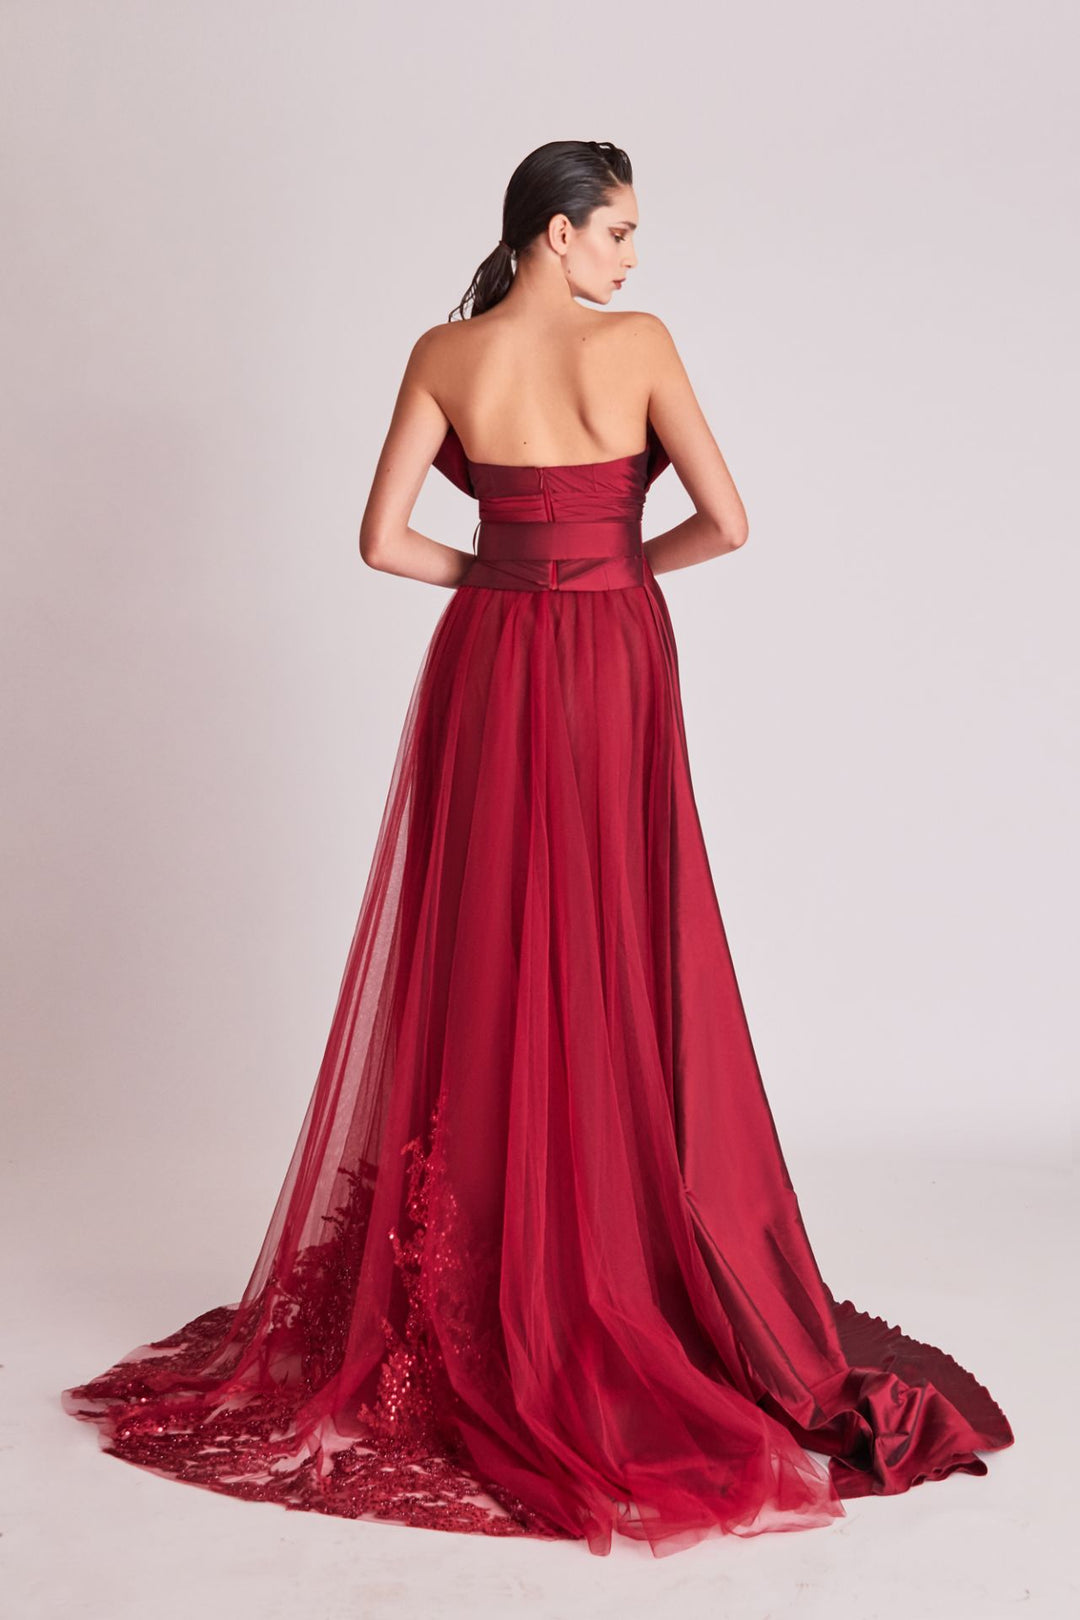 Strapless A-line Dress with Overskirt